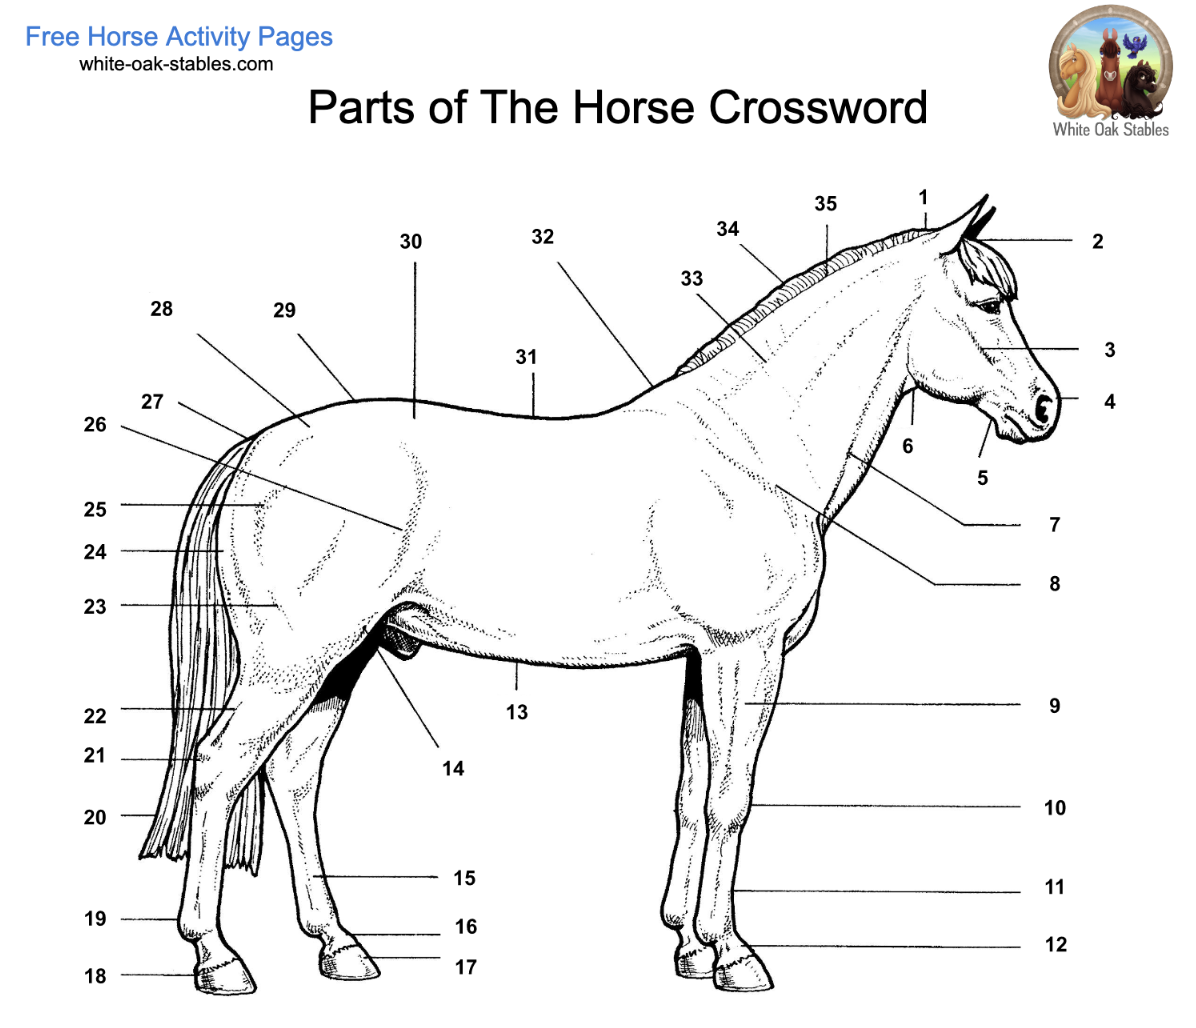 Parts of the Horse Crossword – Activity Page